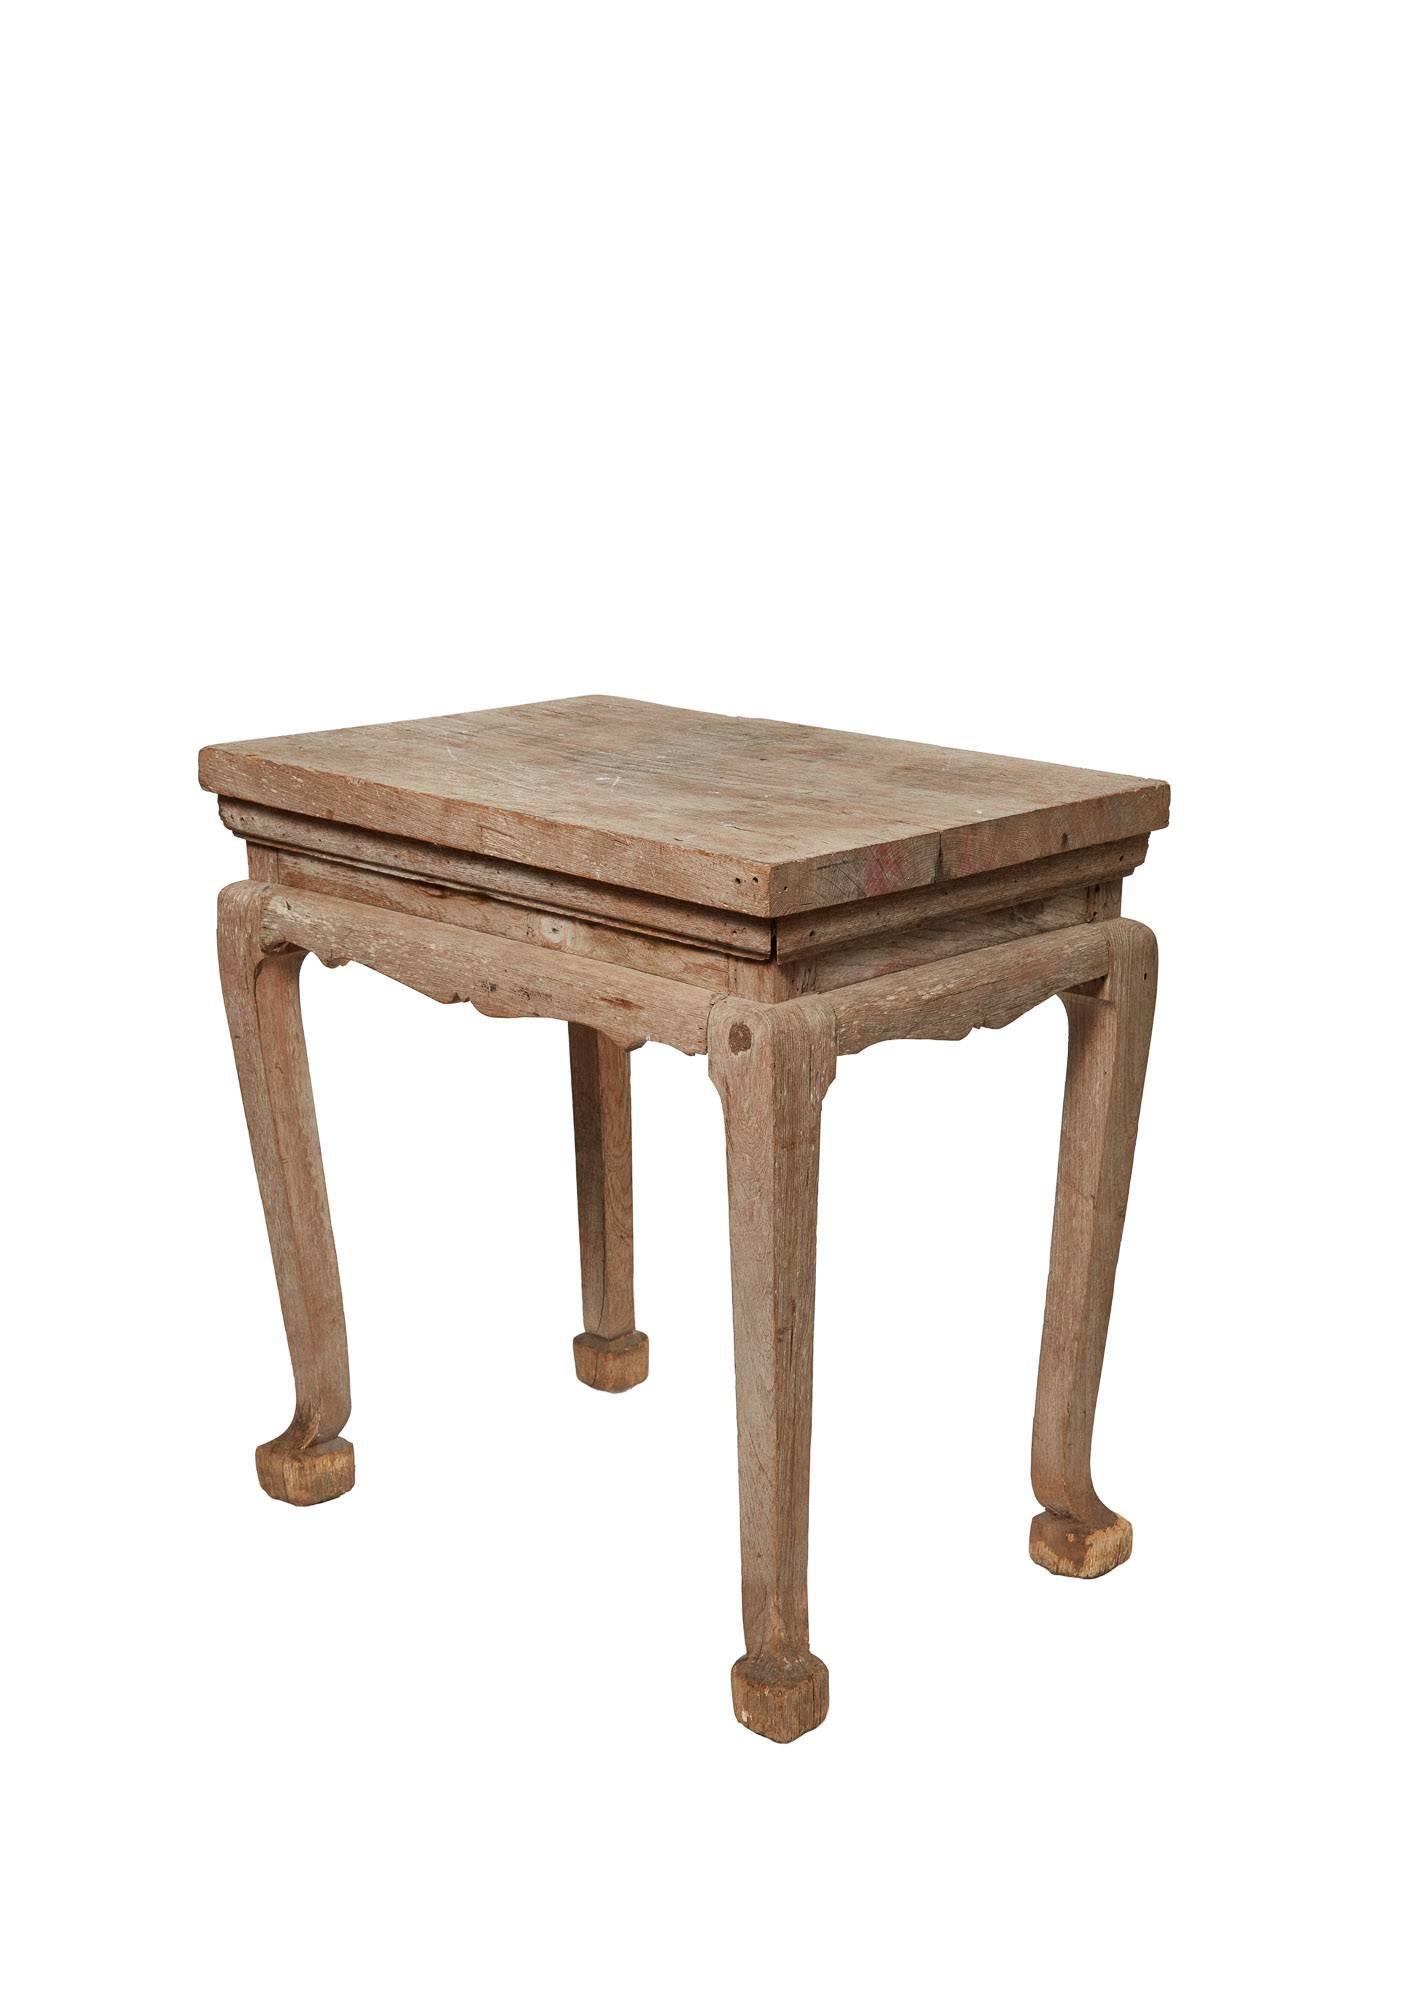 19th century bleached wood Thai table. Handcrafted with a Classic decorative detail on the apron and legs. The top is worn from years of use and finish appears to have been worn off or bleached.  Beautiful patina 